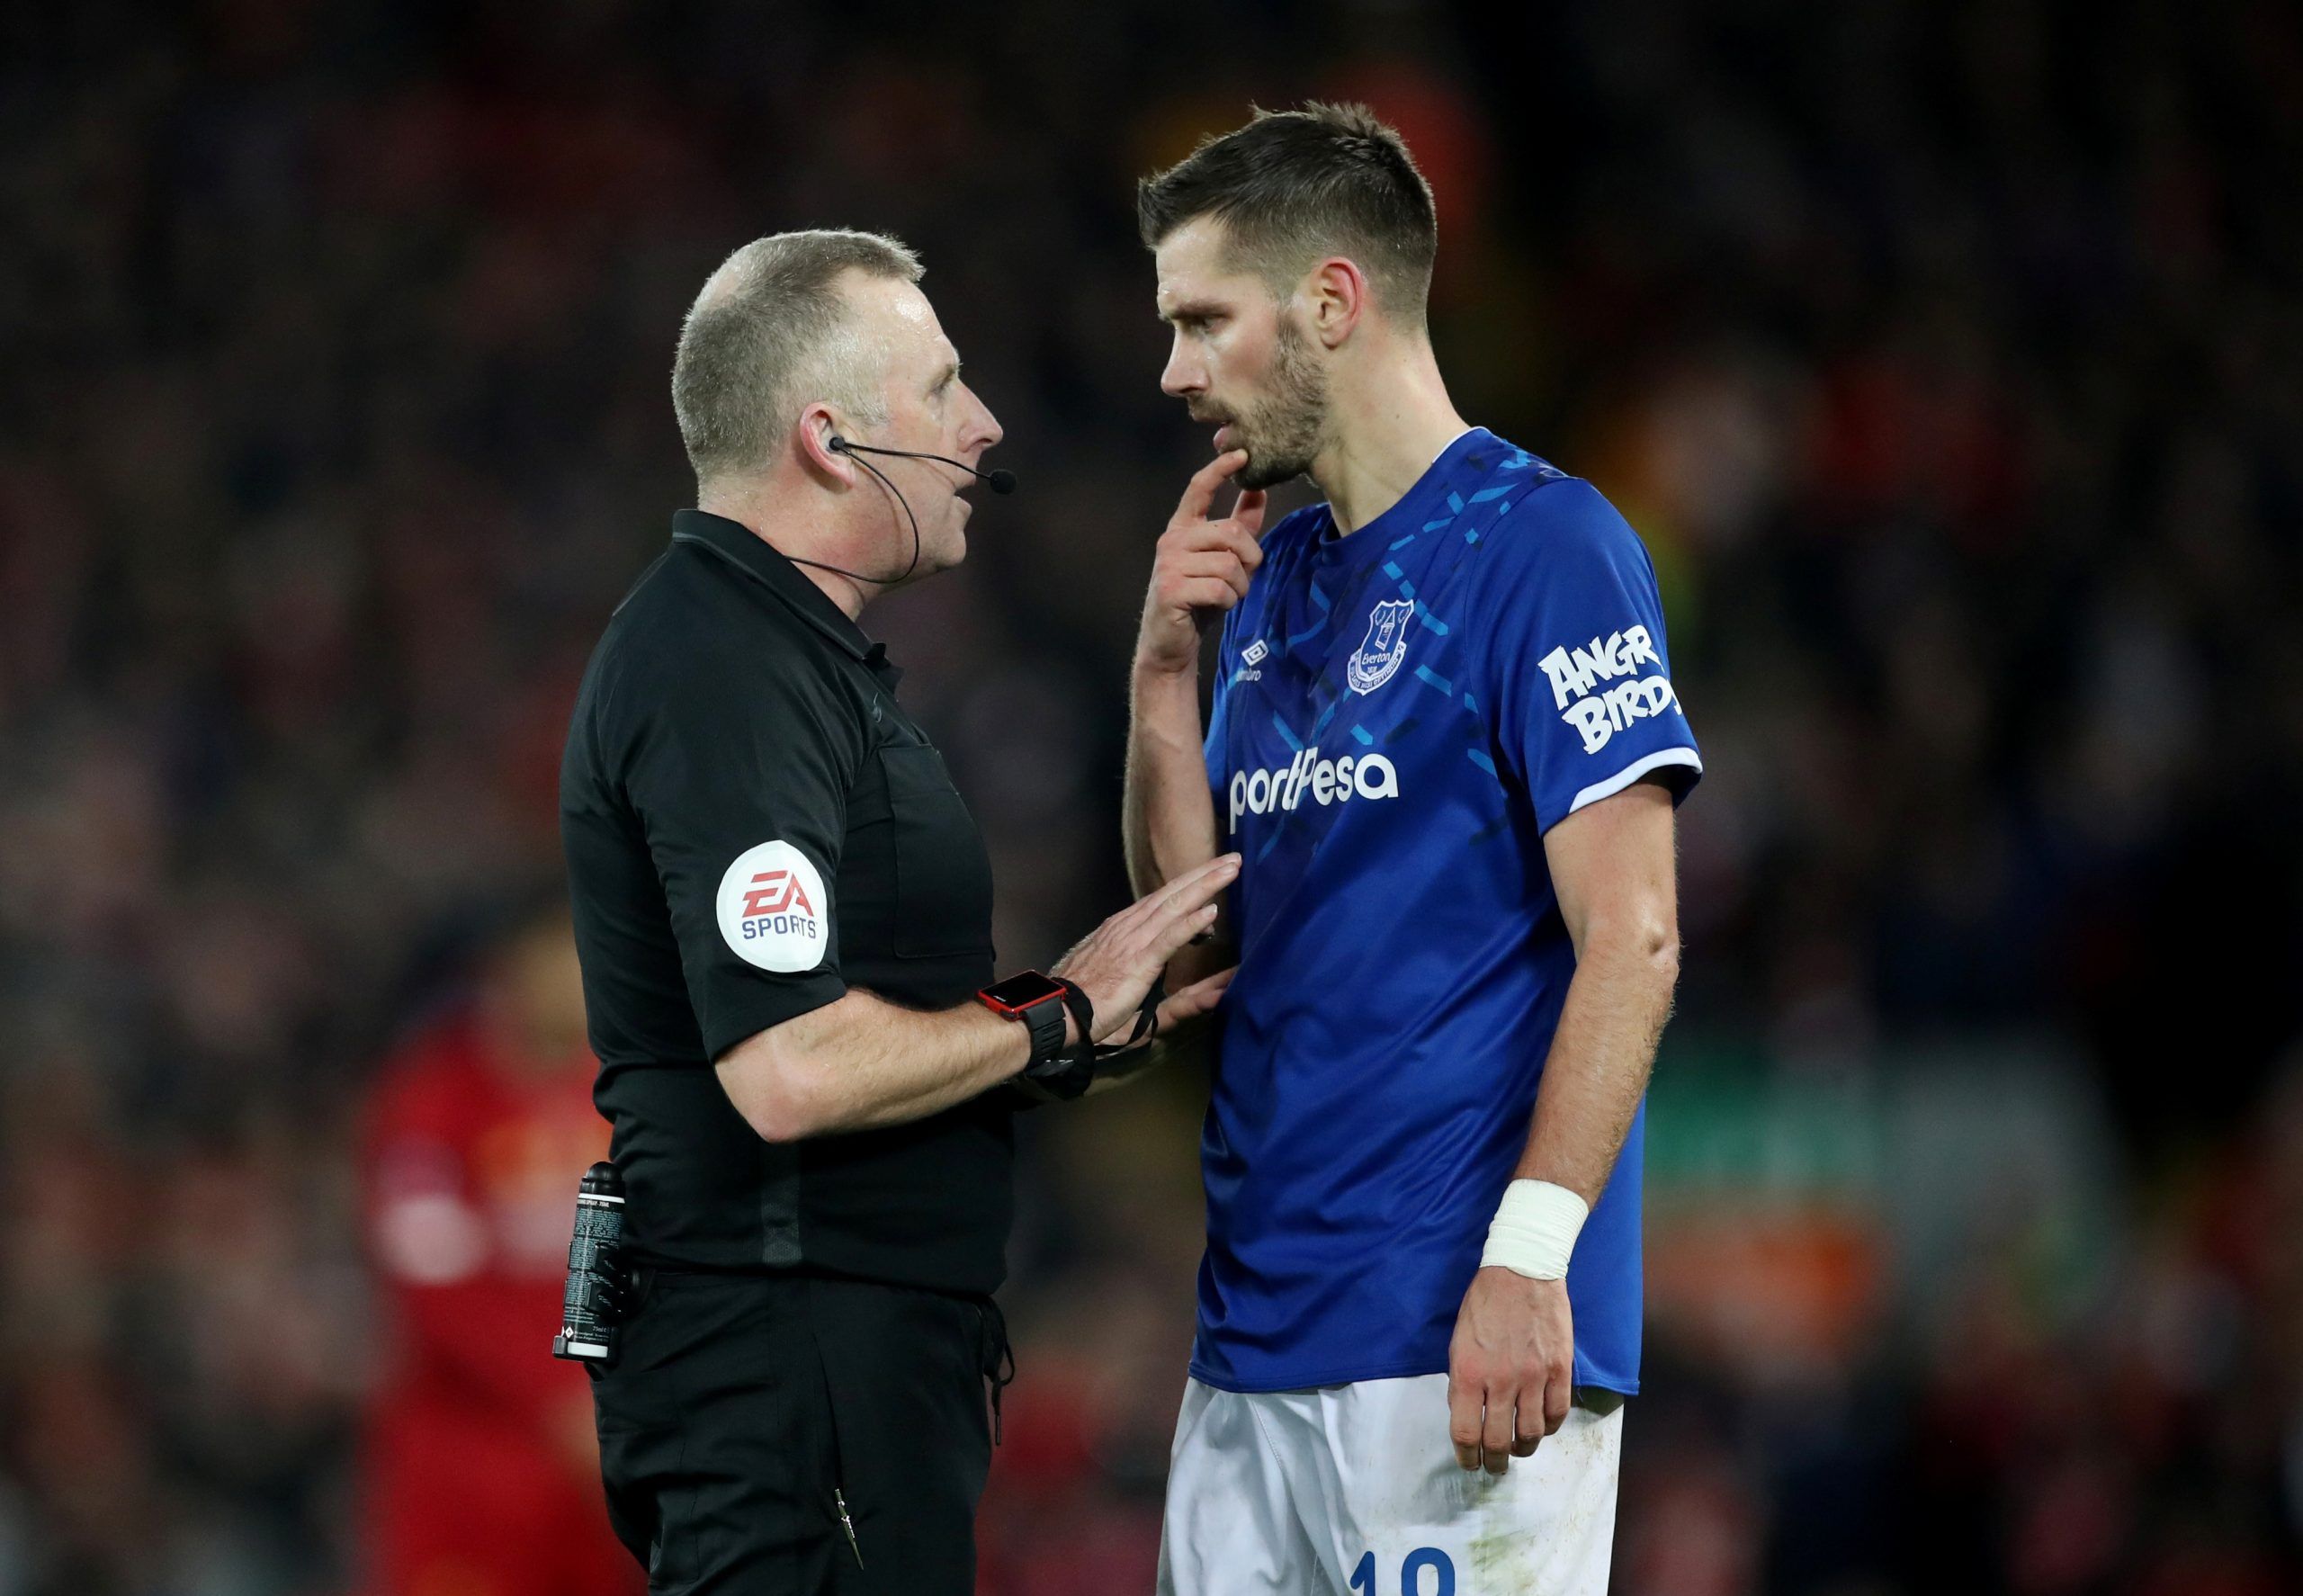 Soccer Football - FA Cup - Third Round - Liverpool v Everton - Anfield, Liverpool, Britain - January 5, 2020  Everton's Morgan Schneiderlin with referee Jonathan Moss  Action Images via Reuters/Carl Recine